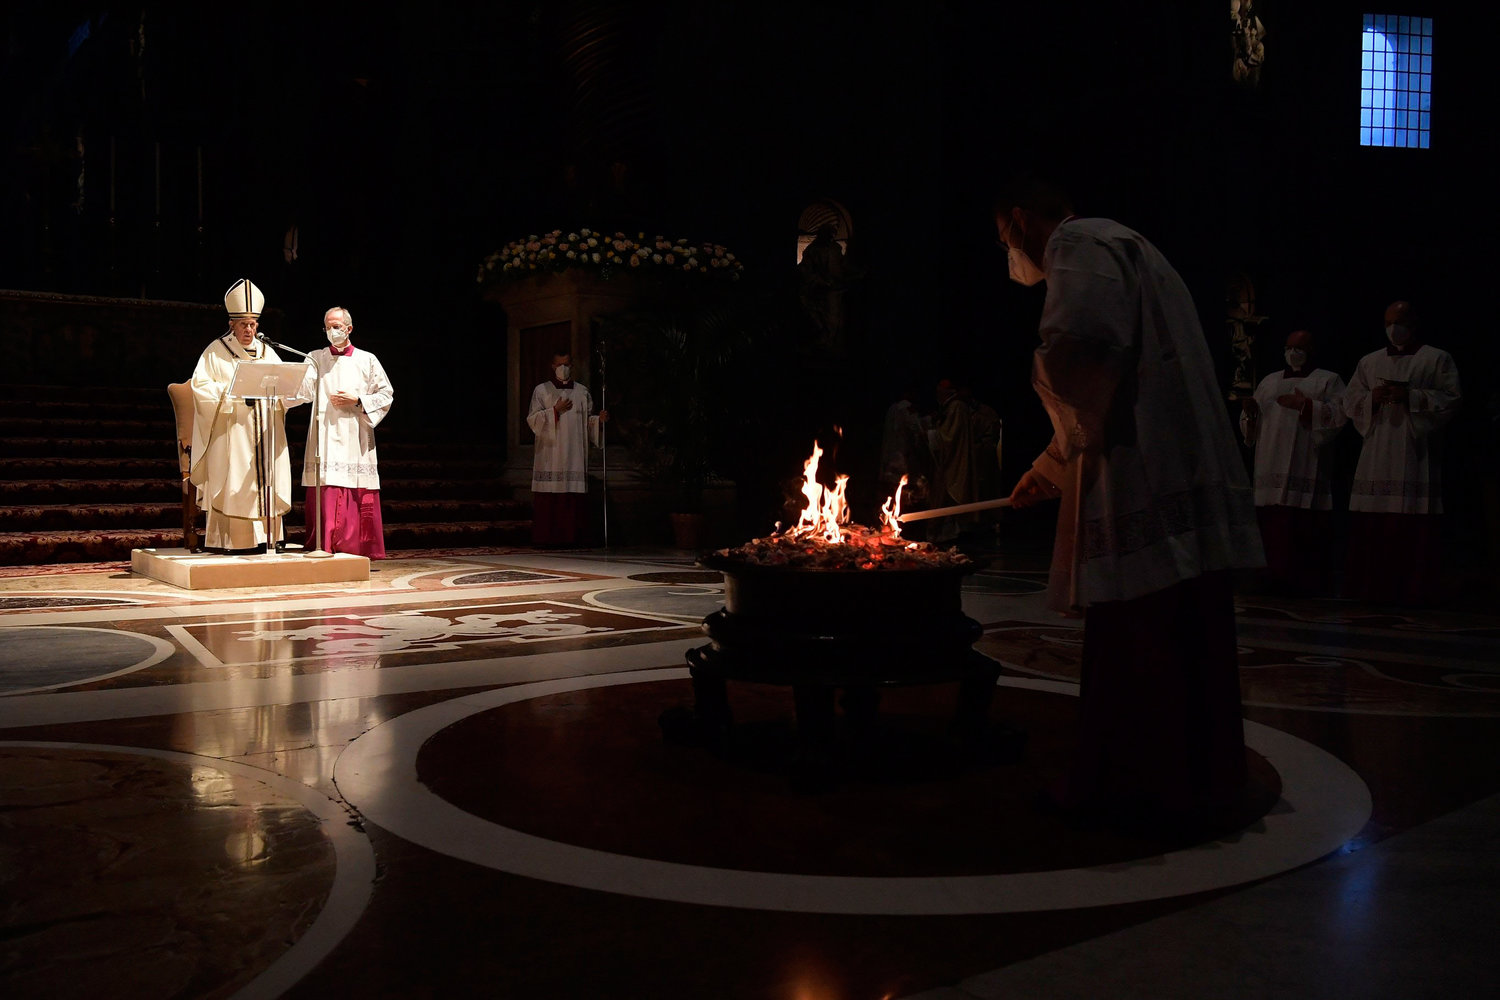 Pope Francis celebrates the Easter Vigil in St. Peter’s Basilica at the Vatican April 3. The Easter Vigil was celebrated in a near empty basilica for the second year in a row as Italy continues to fight the Covid-19 pandemic.